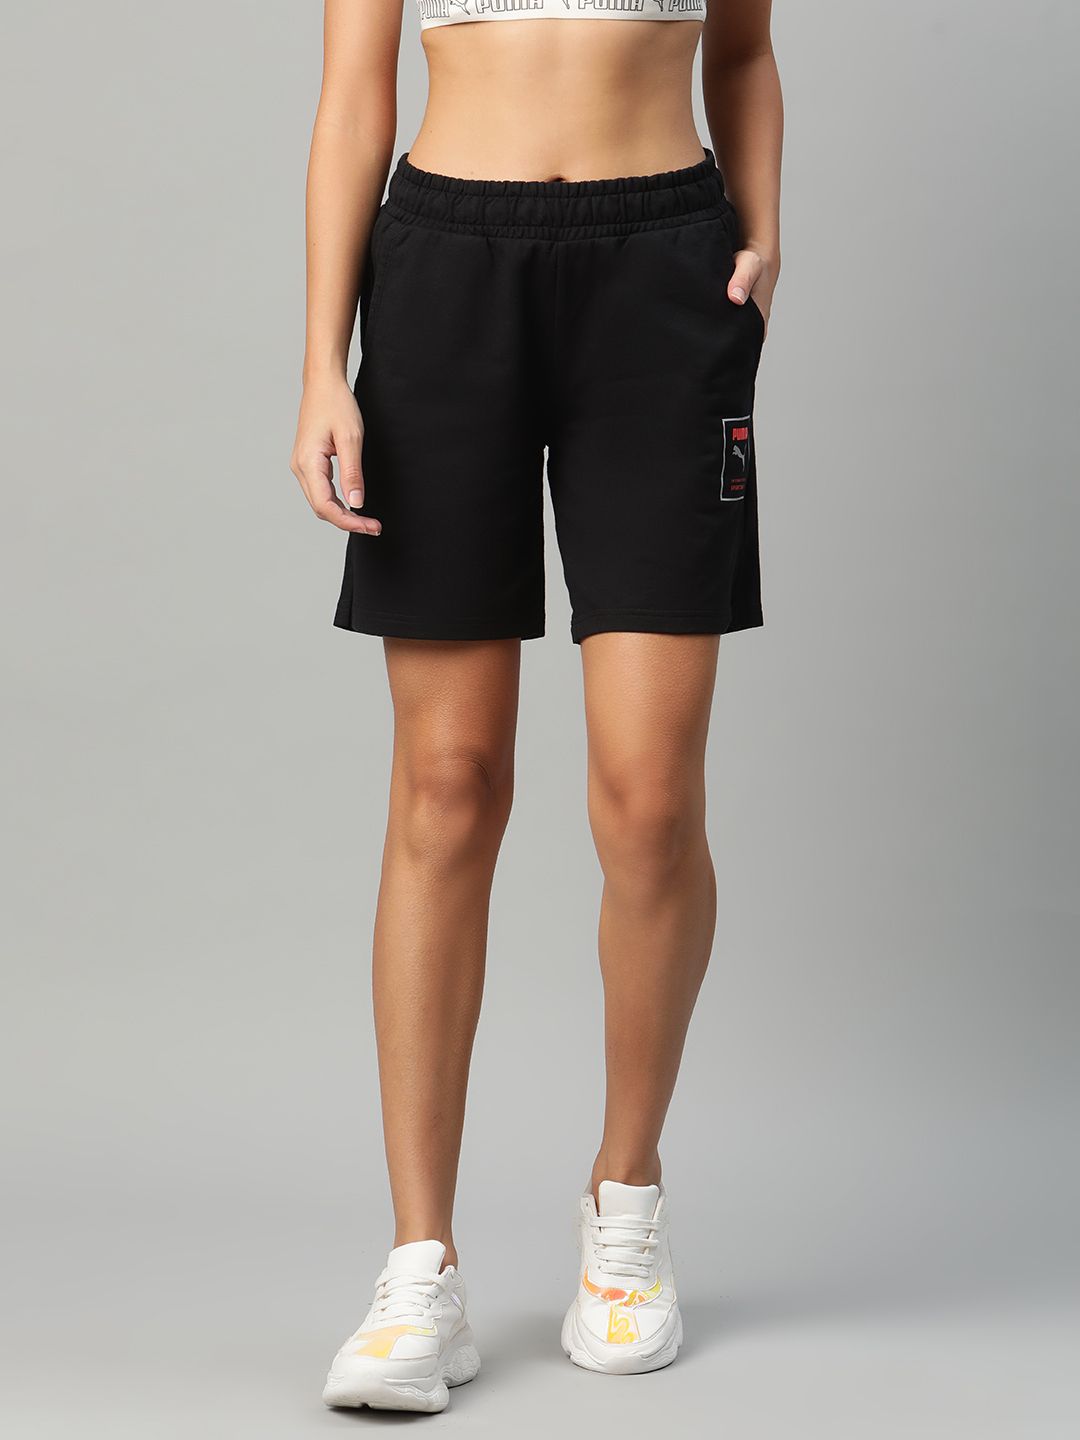 Puma Women Black Graphic 3 Solid Regular Fit Sports Shorts Price in India